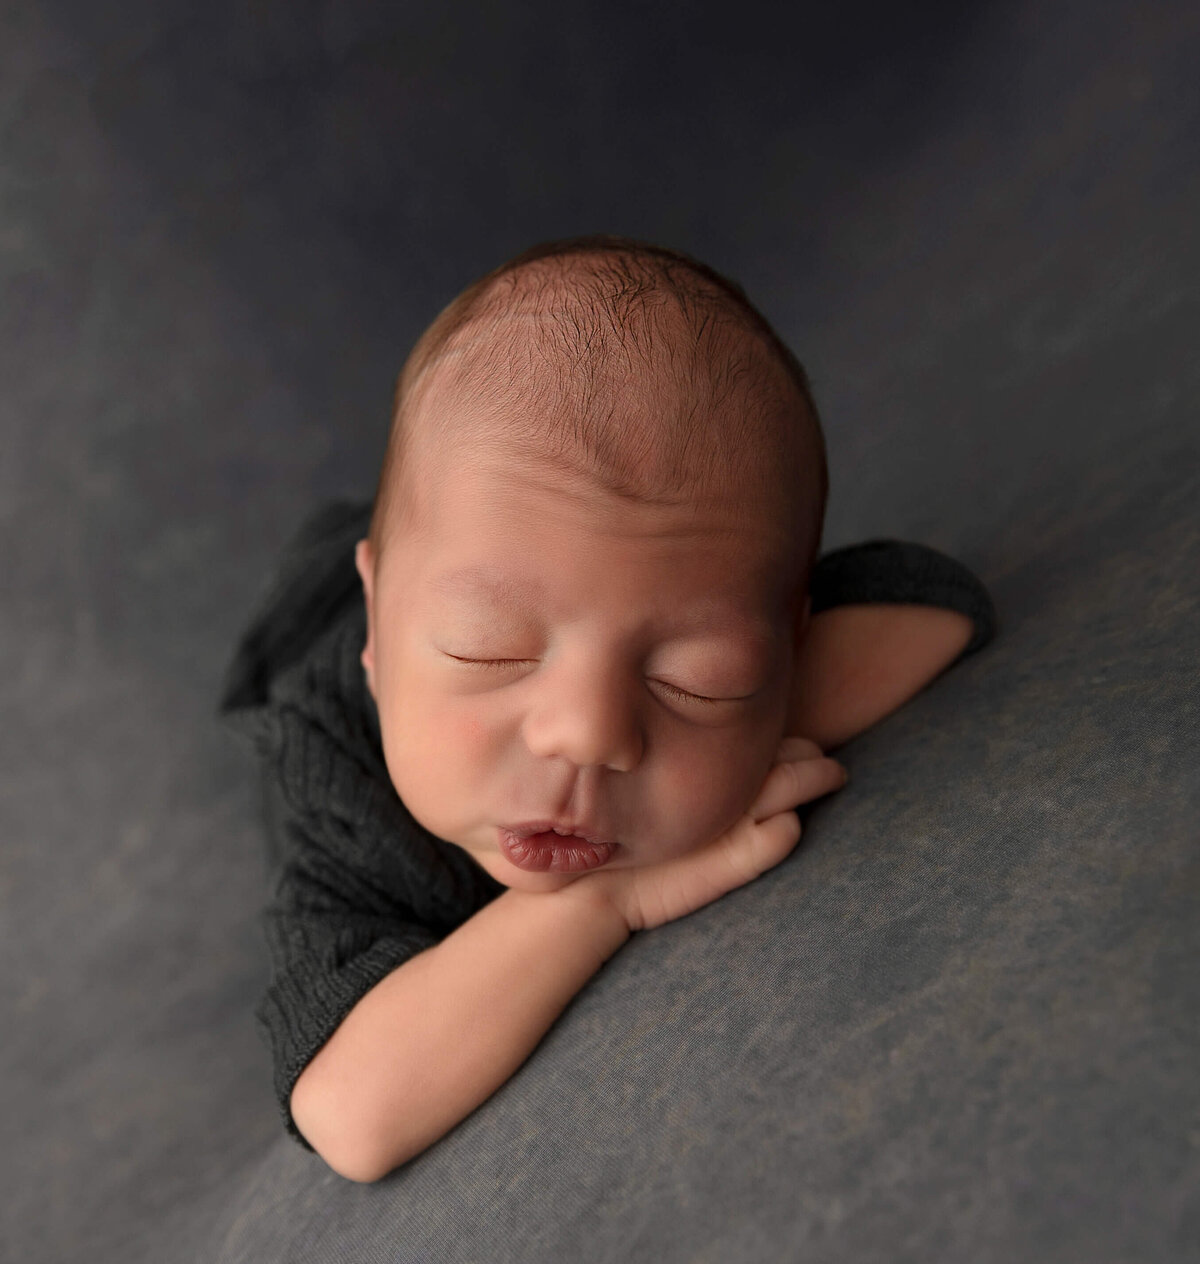 Newborn baby boy dressed in a grey romper posed chin on hands in an Erie Pa photography studio